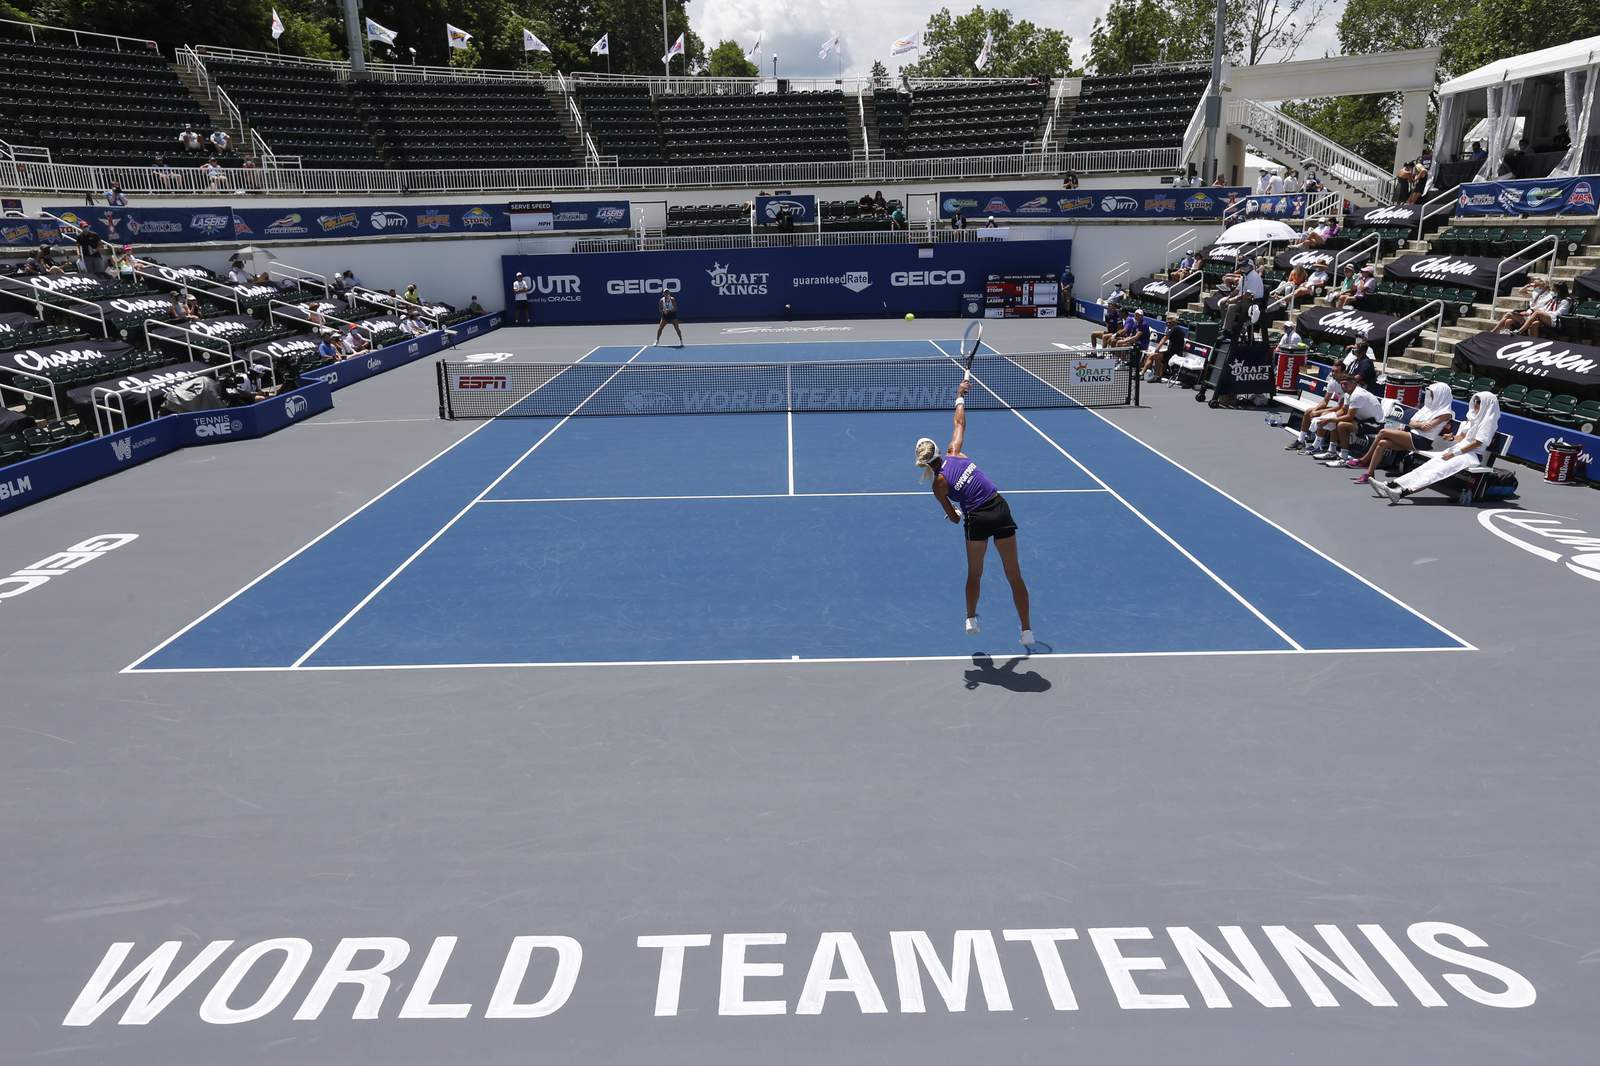 Fans welcomed to World TeamTennis matches in West Virginia